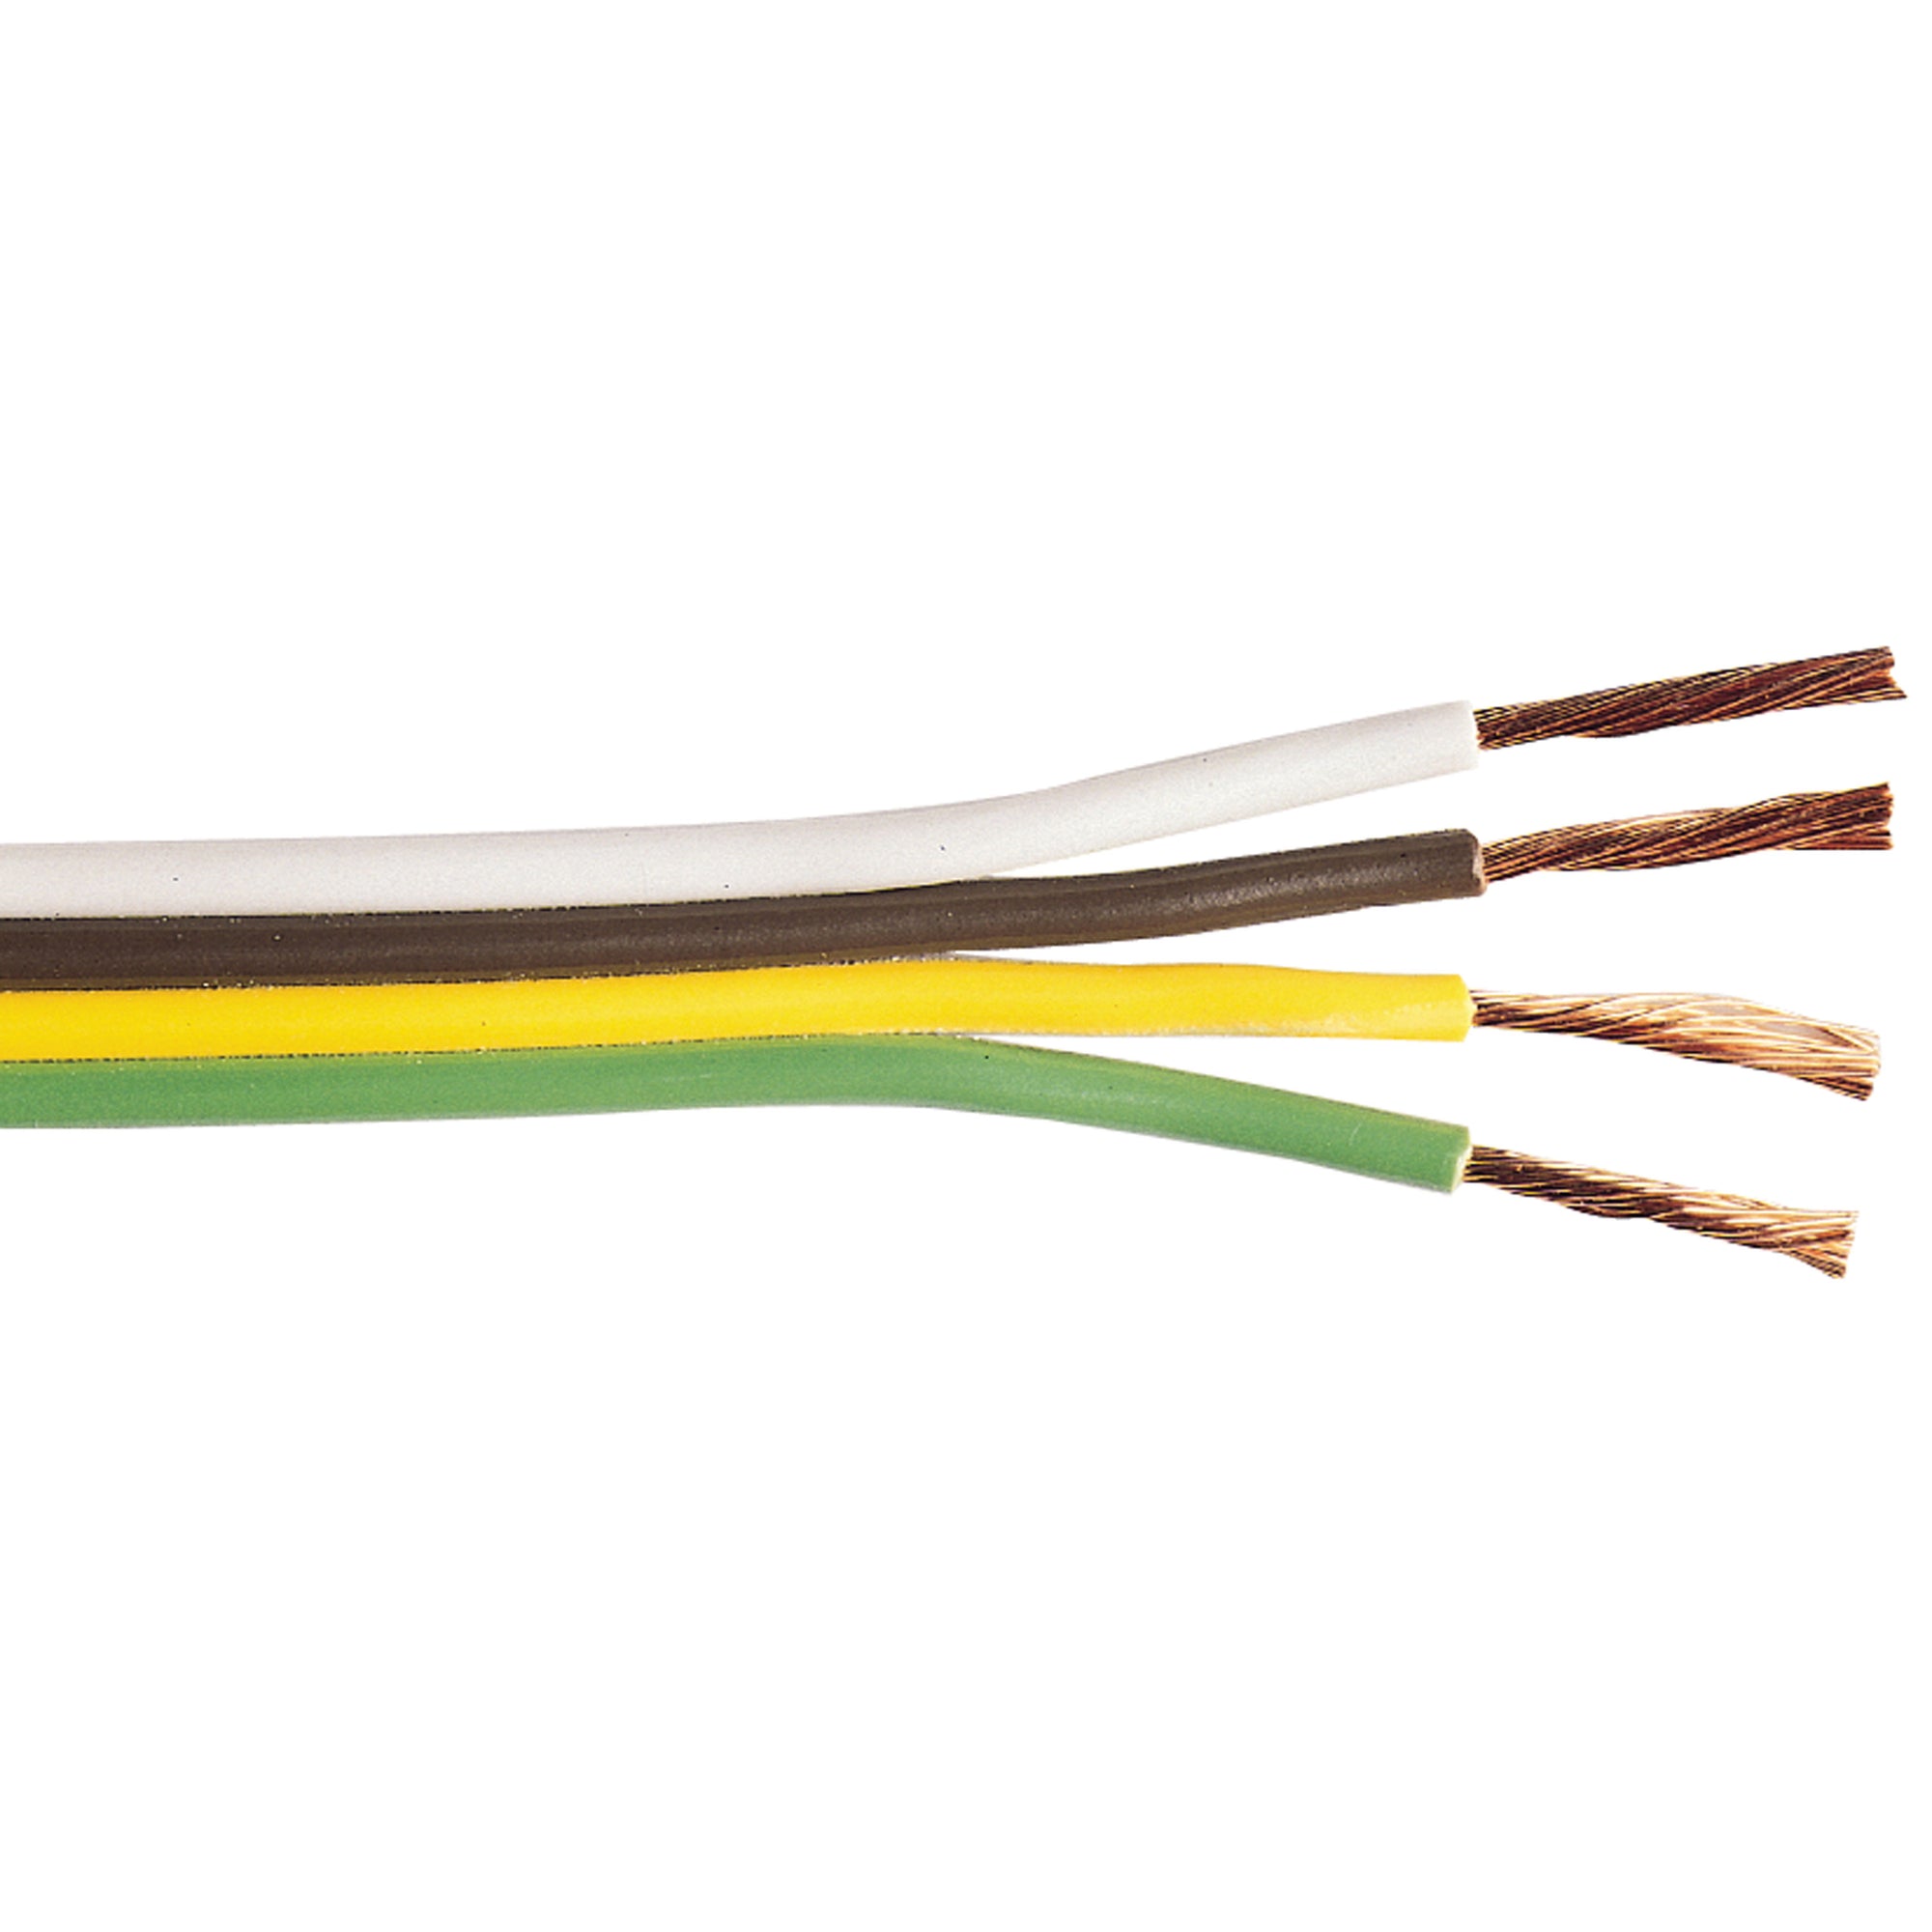 Quick Cable 232202-100 Ribbon Wire - 100' 14 Gauge, 4 Wire